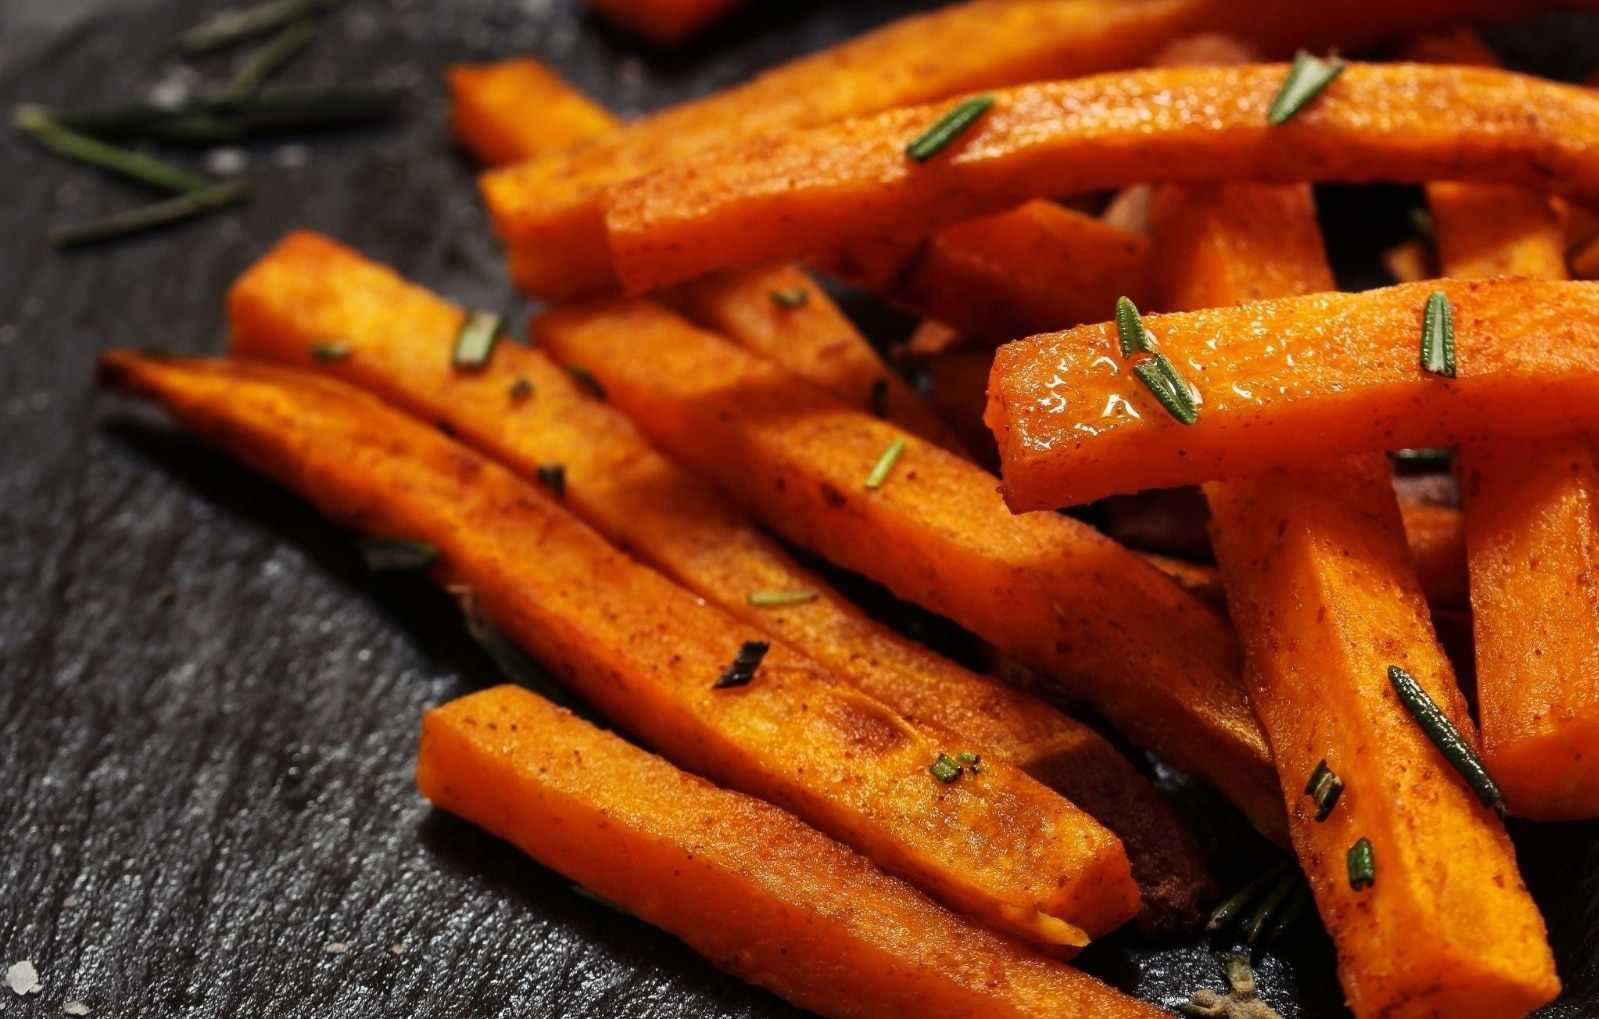 Can heirloom carrots be eaten raw?